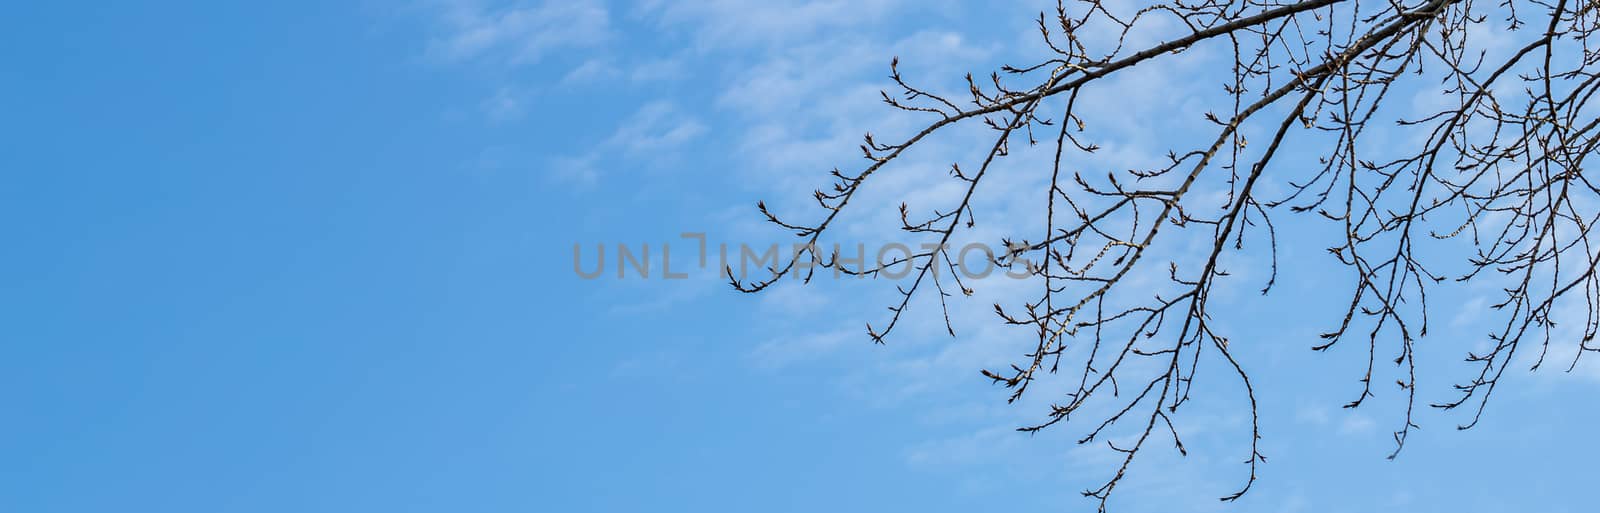 leafless tree branches against the blue sky. Bright Blue sky with white clouds over the horizon in sunny day. Nature sky background, texture for Design. Natural cloudy Wallpaper or Web banner With Copy Space